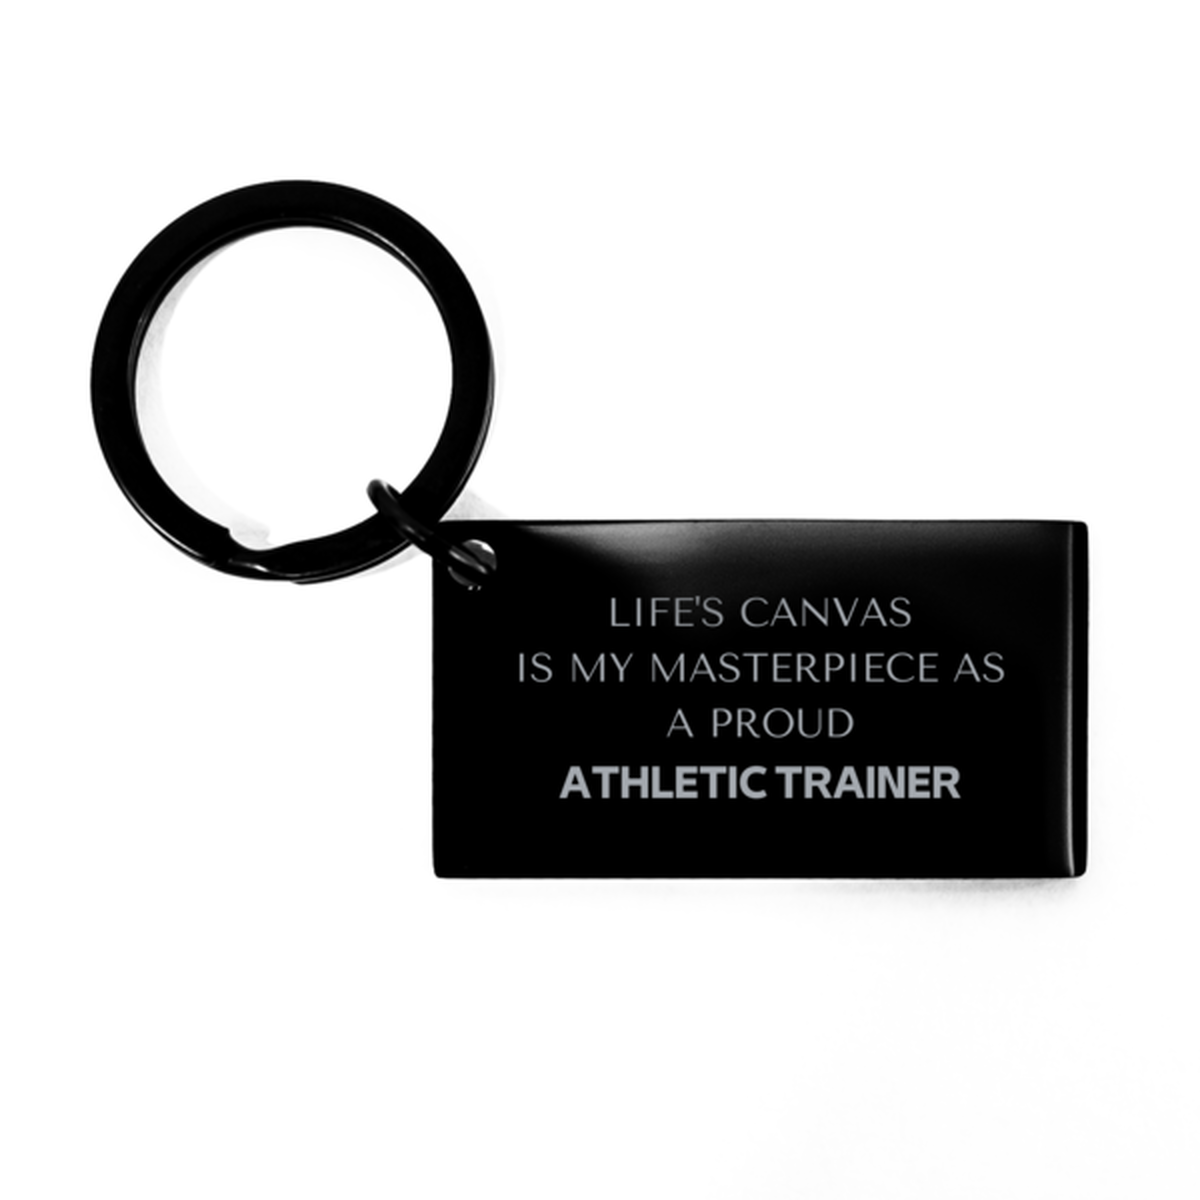 Proud Athletic Trainer Gifts, Life's canvas is my masterpiece, Epic Birthday Christmas Unique Keychain For Athletic Trainer, Coworkers, Men, Women, Friends